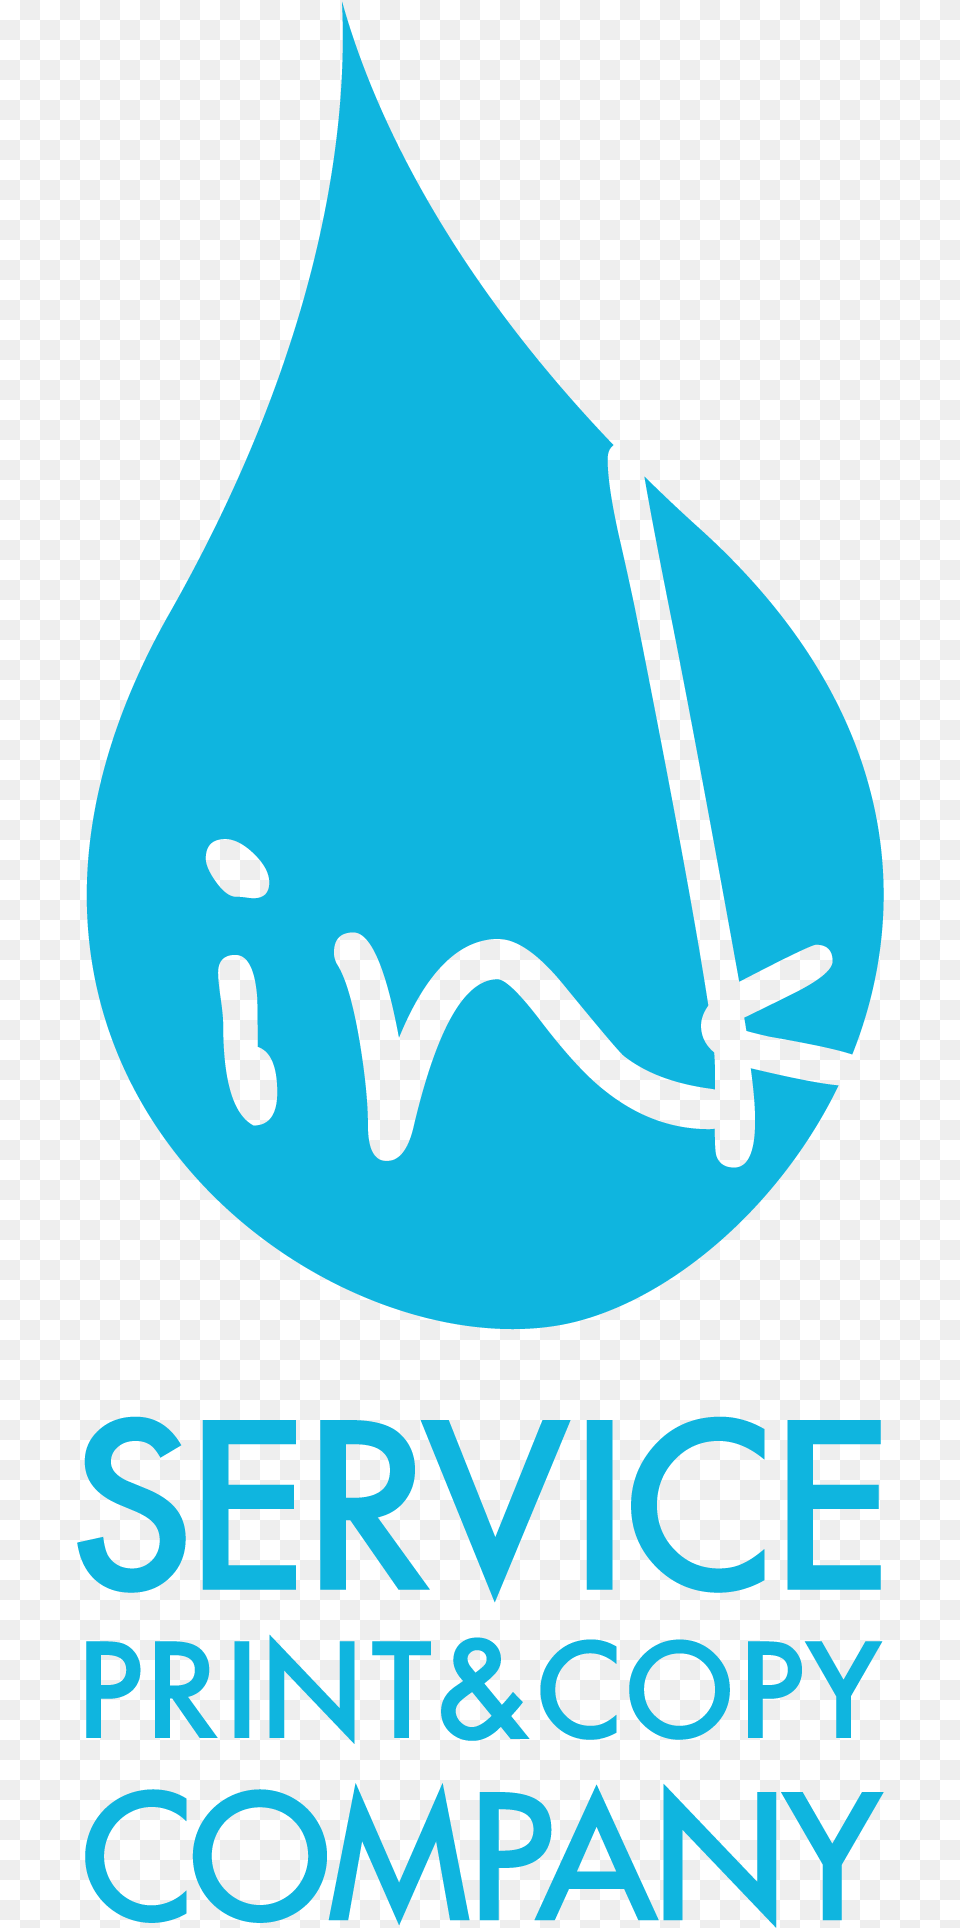 1984inc Userexperience Partners Ink Design Graphic Design, Advertisement, Poster, Droplet, Adult Png Image